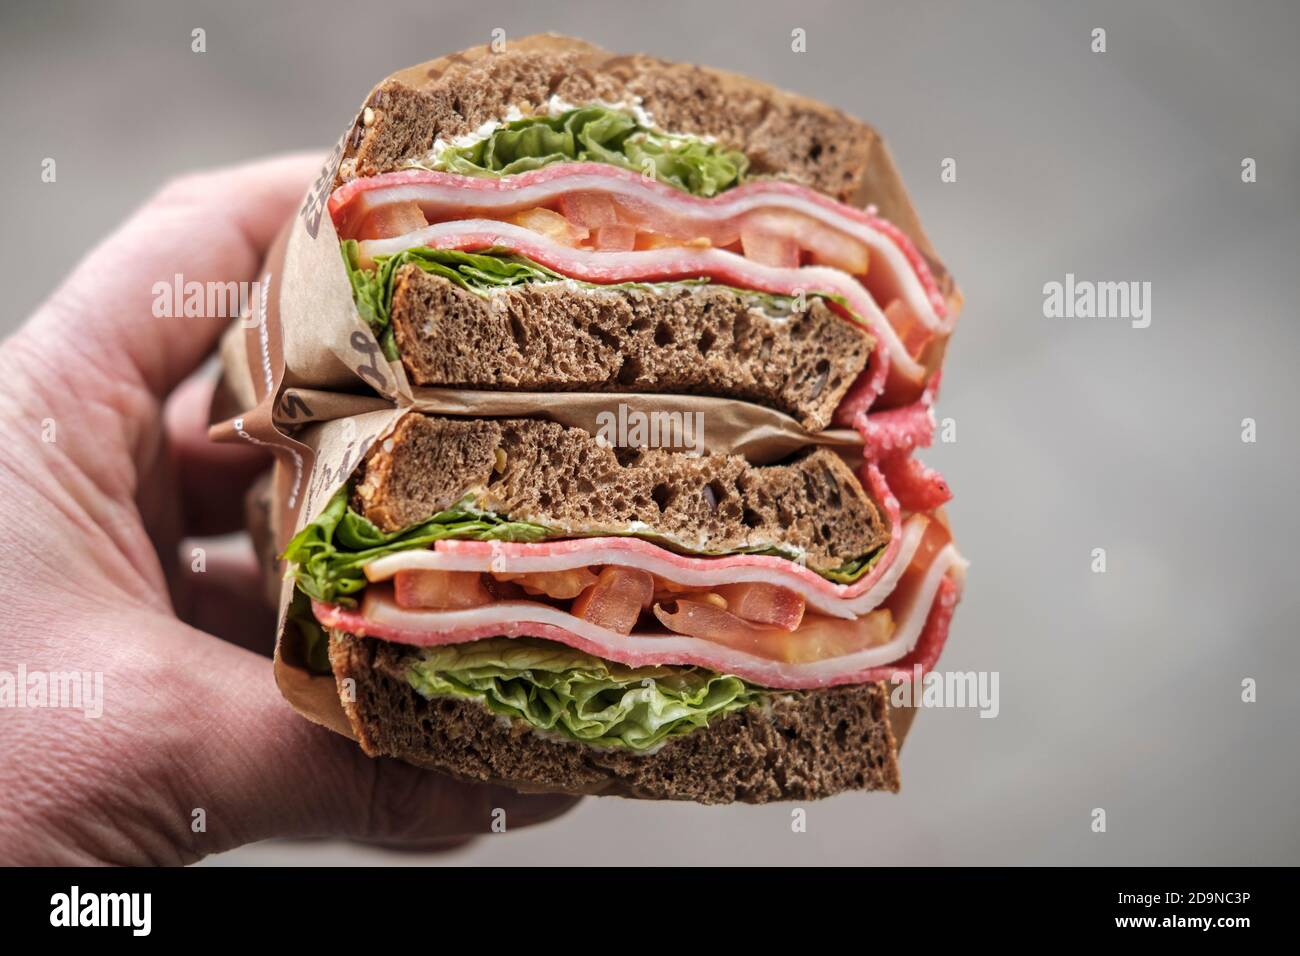 Deli sandwich - salami,cheese, lets and tomatoes, wholegrainbread, Close-up. Stock Photo